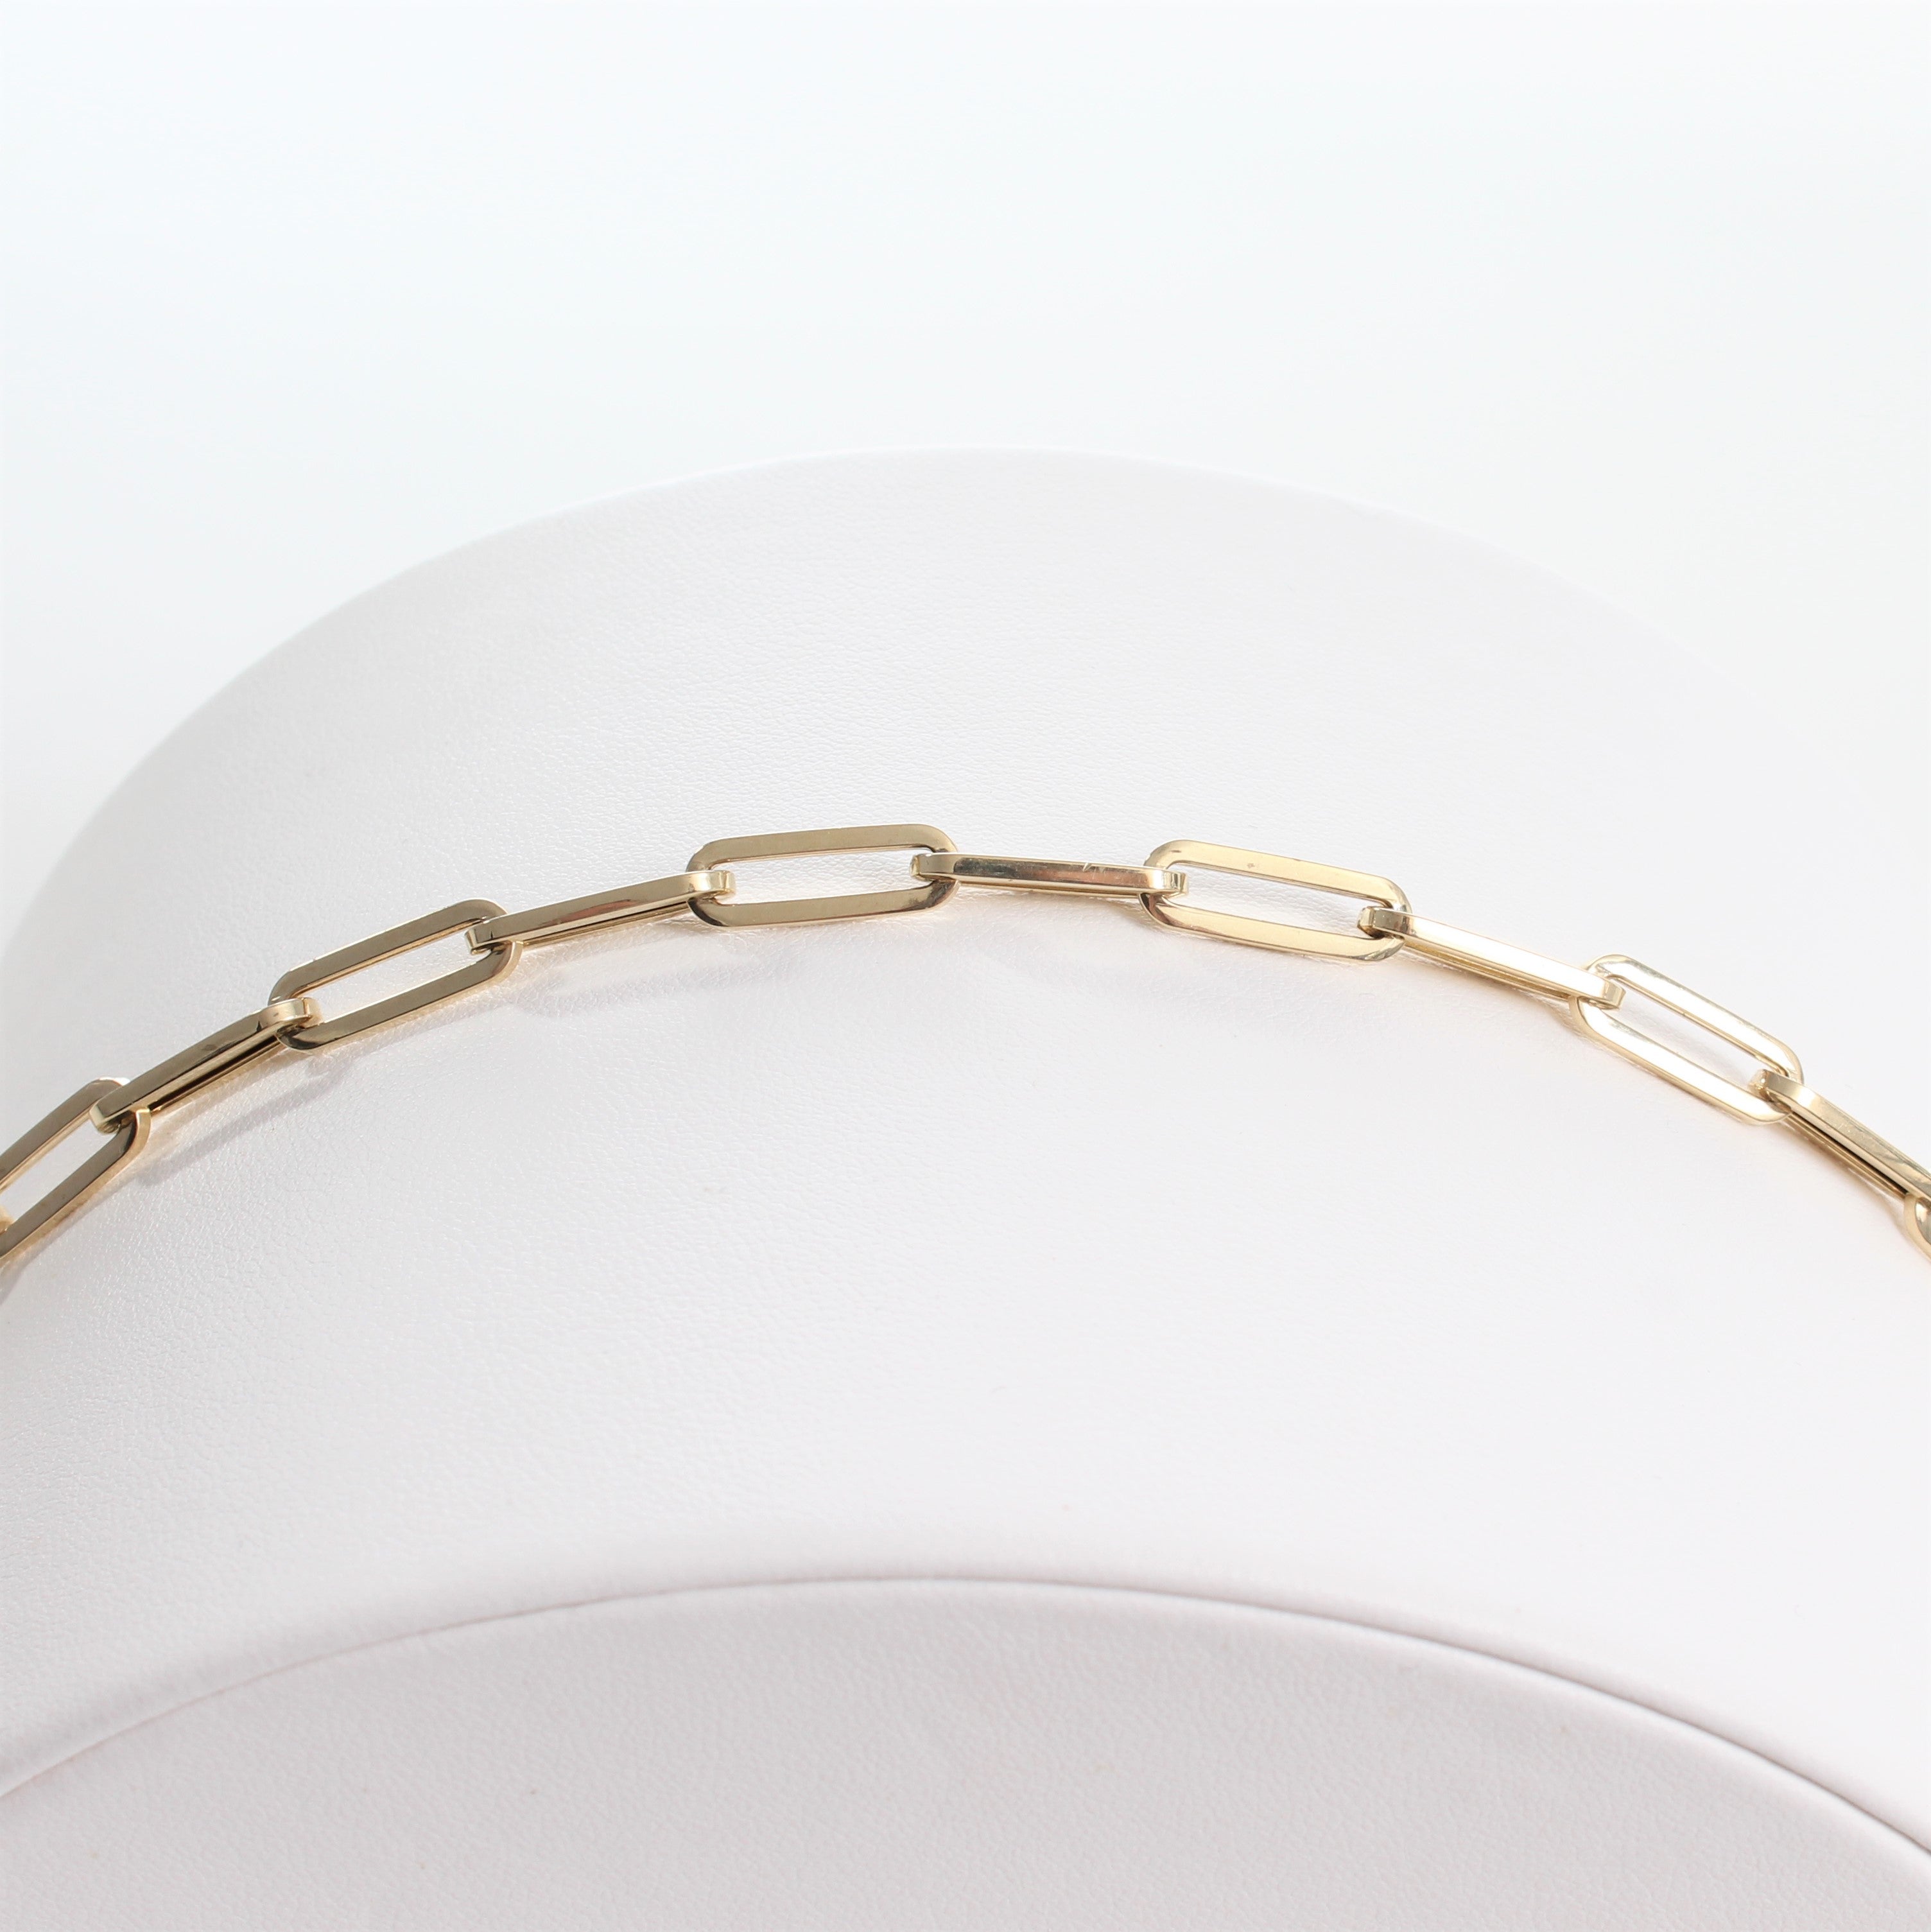 14k Yellow Gold Retro Elongated Link Paperclip Large Link Bracelet. close-up view of unclasped bracelet laid out on a white jewelry display.